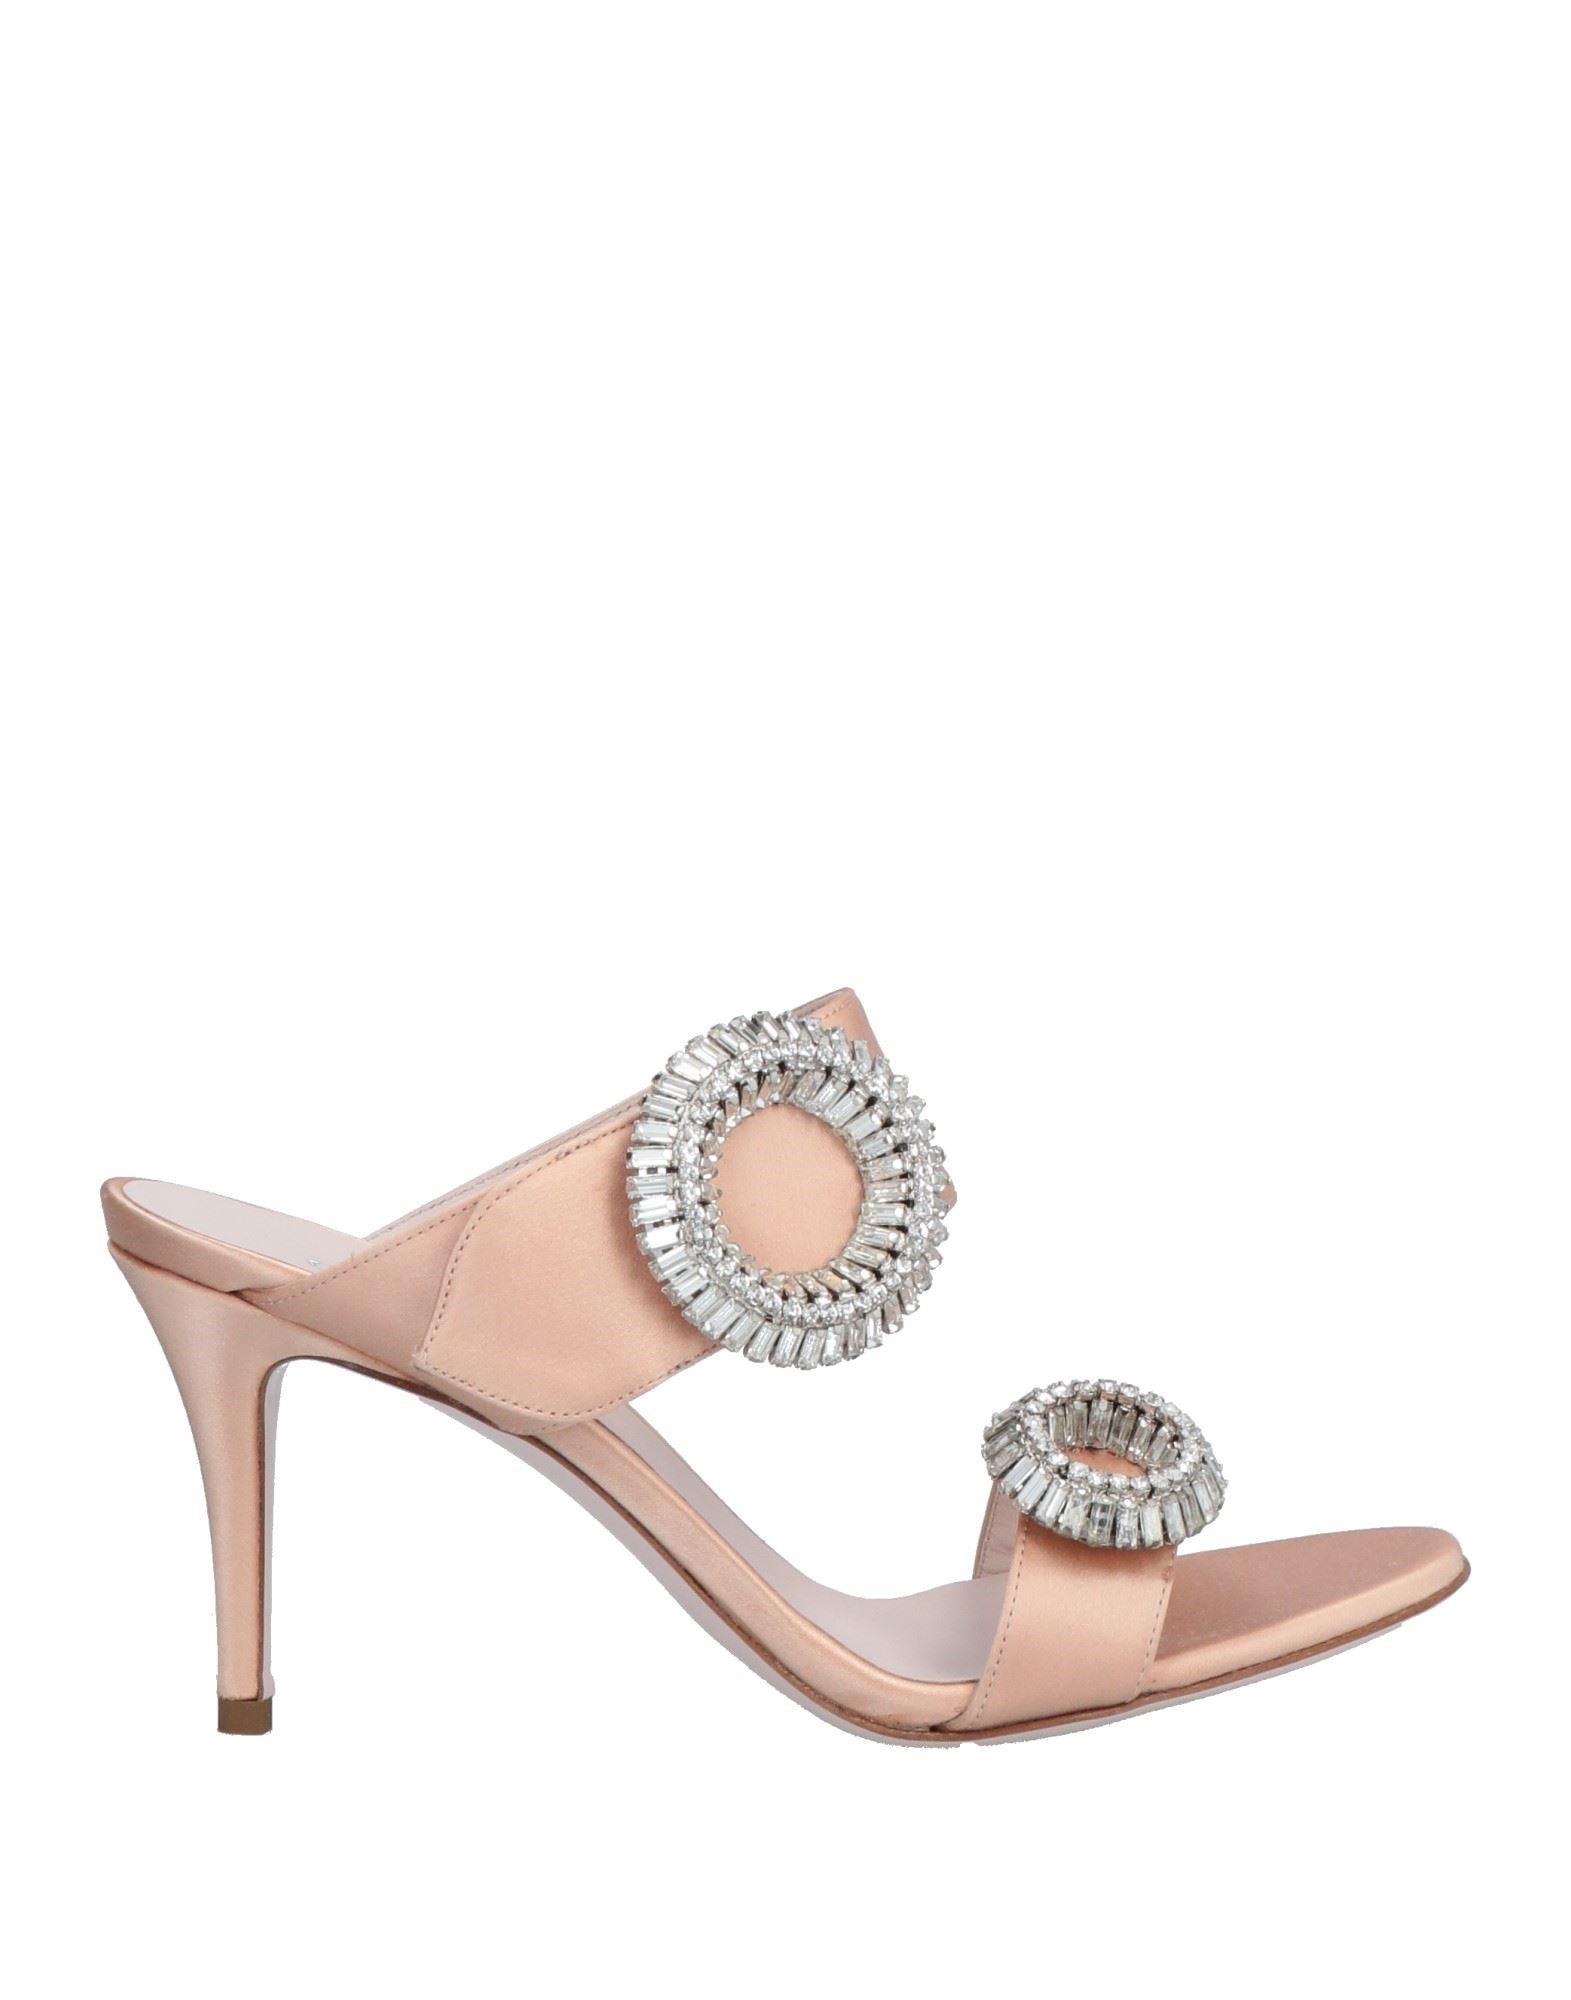 Gedebe Sandals In Salmon Pink